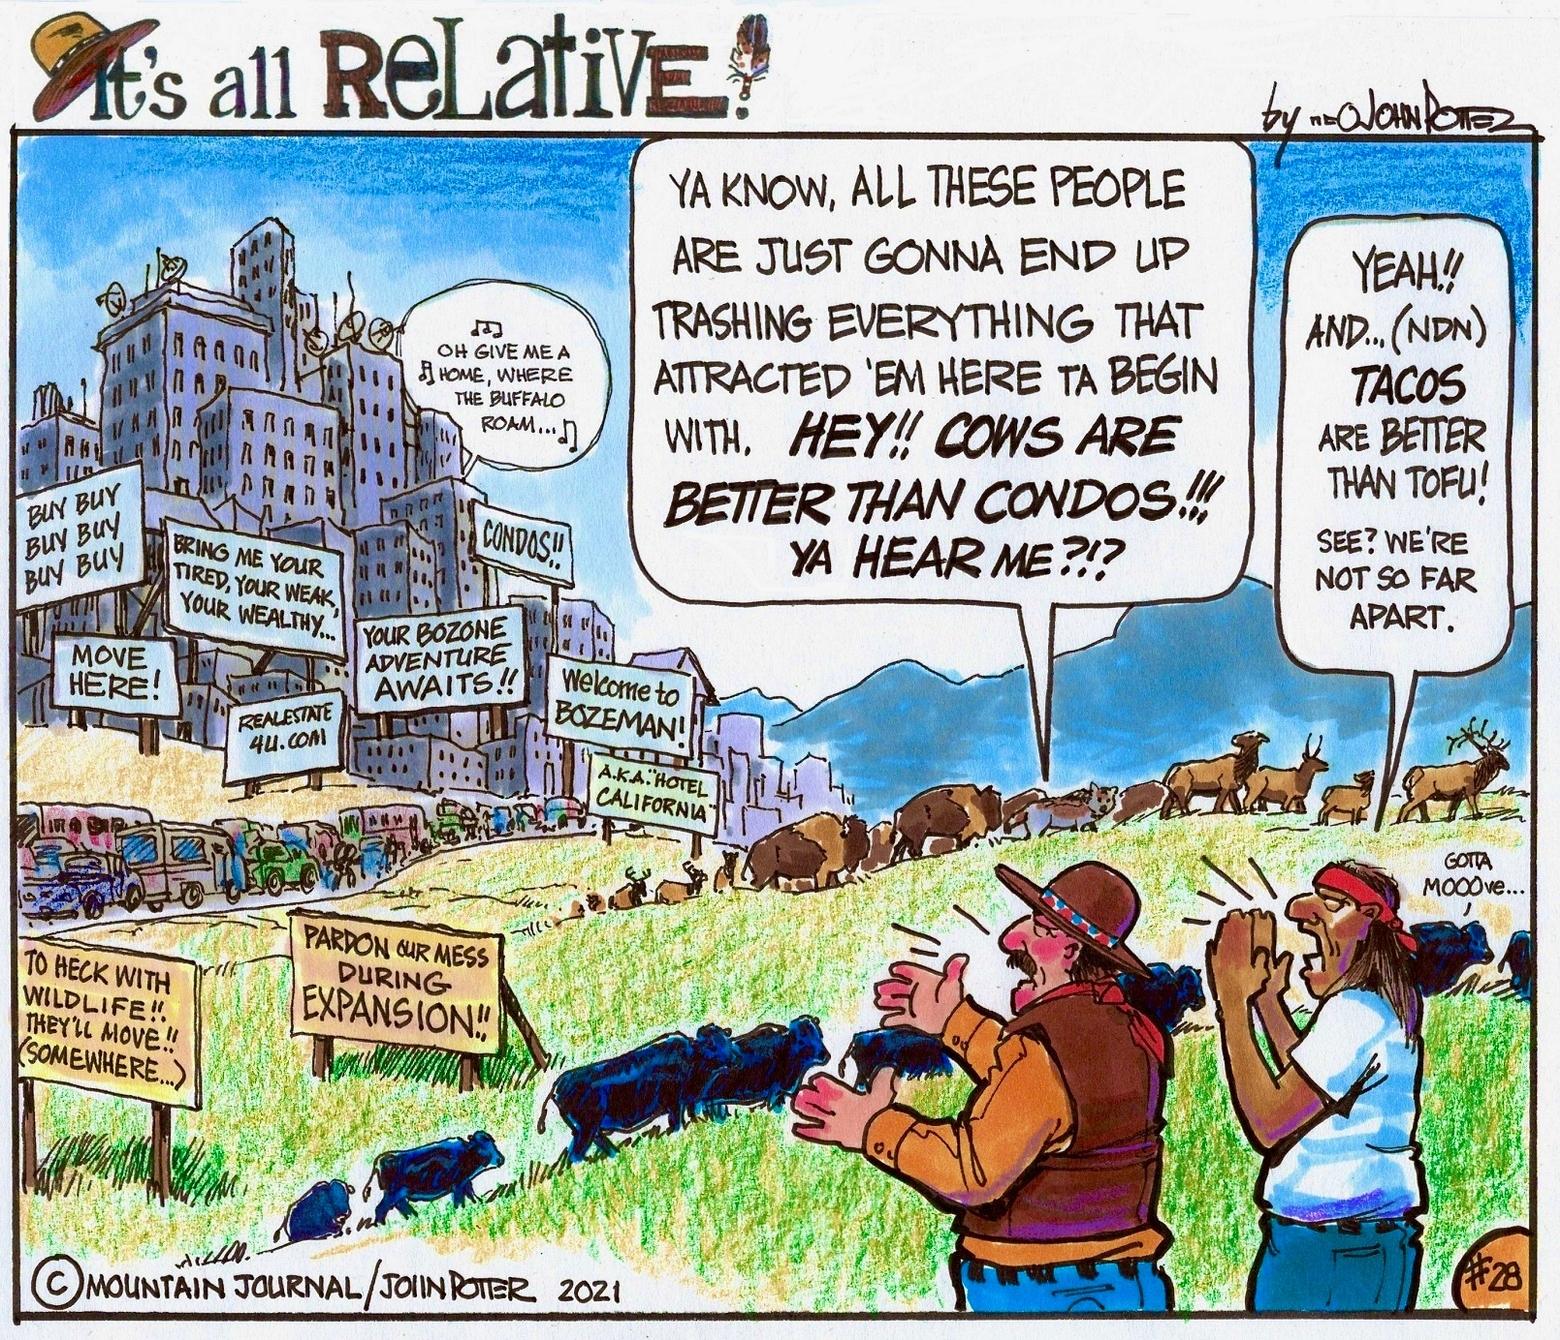 Mountain Journal cartoonist John Potter created this satire with Bozeman in mind,. Many readers beyond southwest Montana responded that it also describes the boomtown attitude toward development in their towns, too, including Jackson, Wyoming.